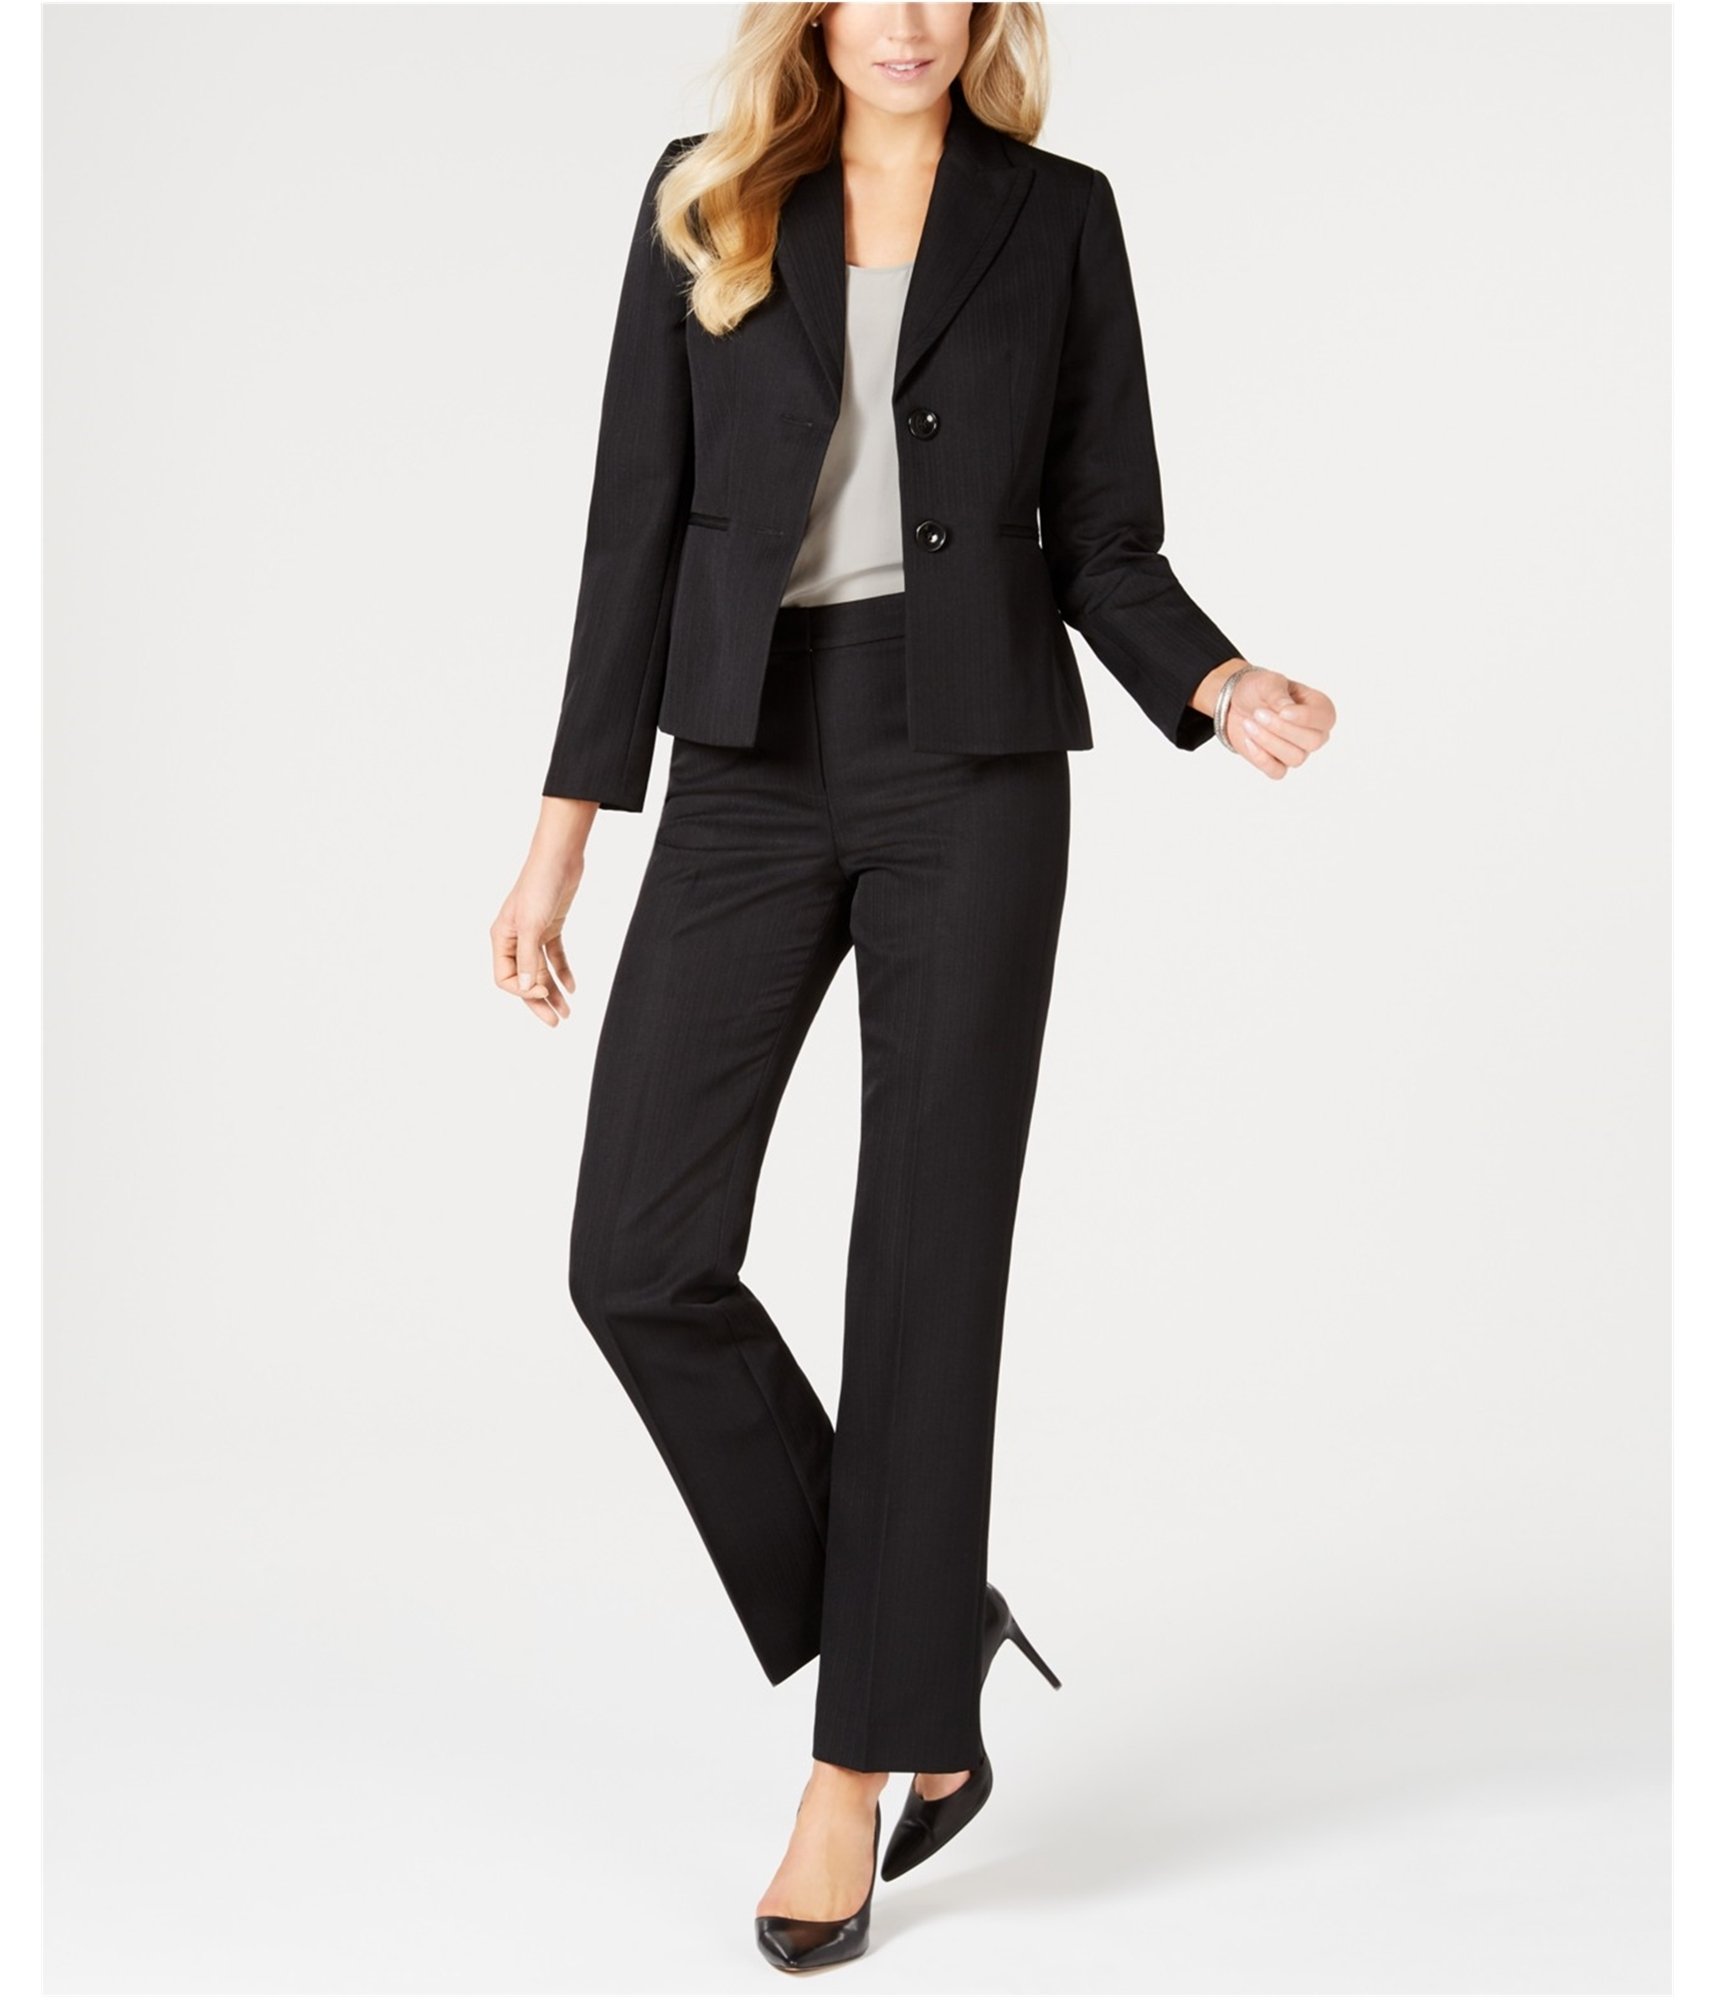 woman-wearing-shadow-pant-suit